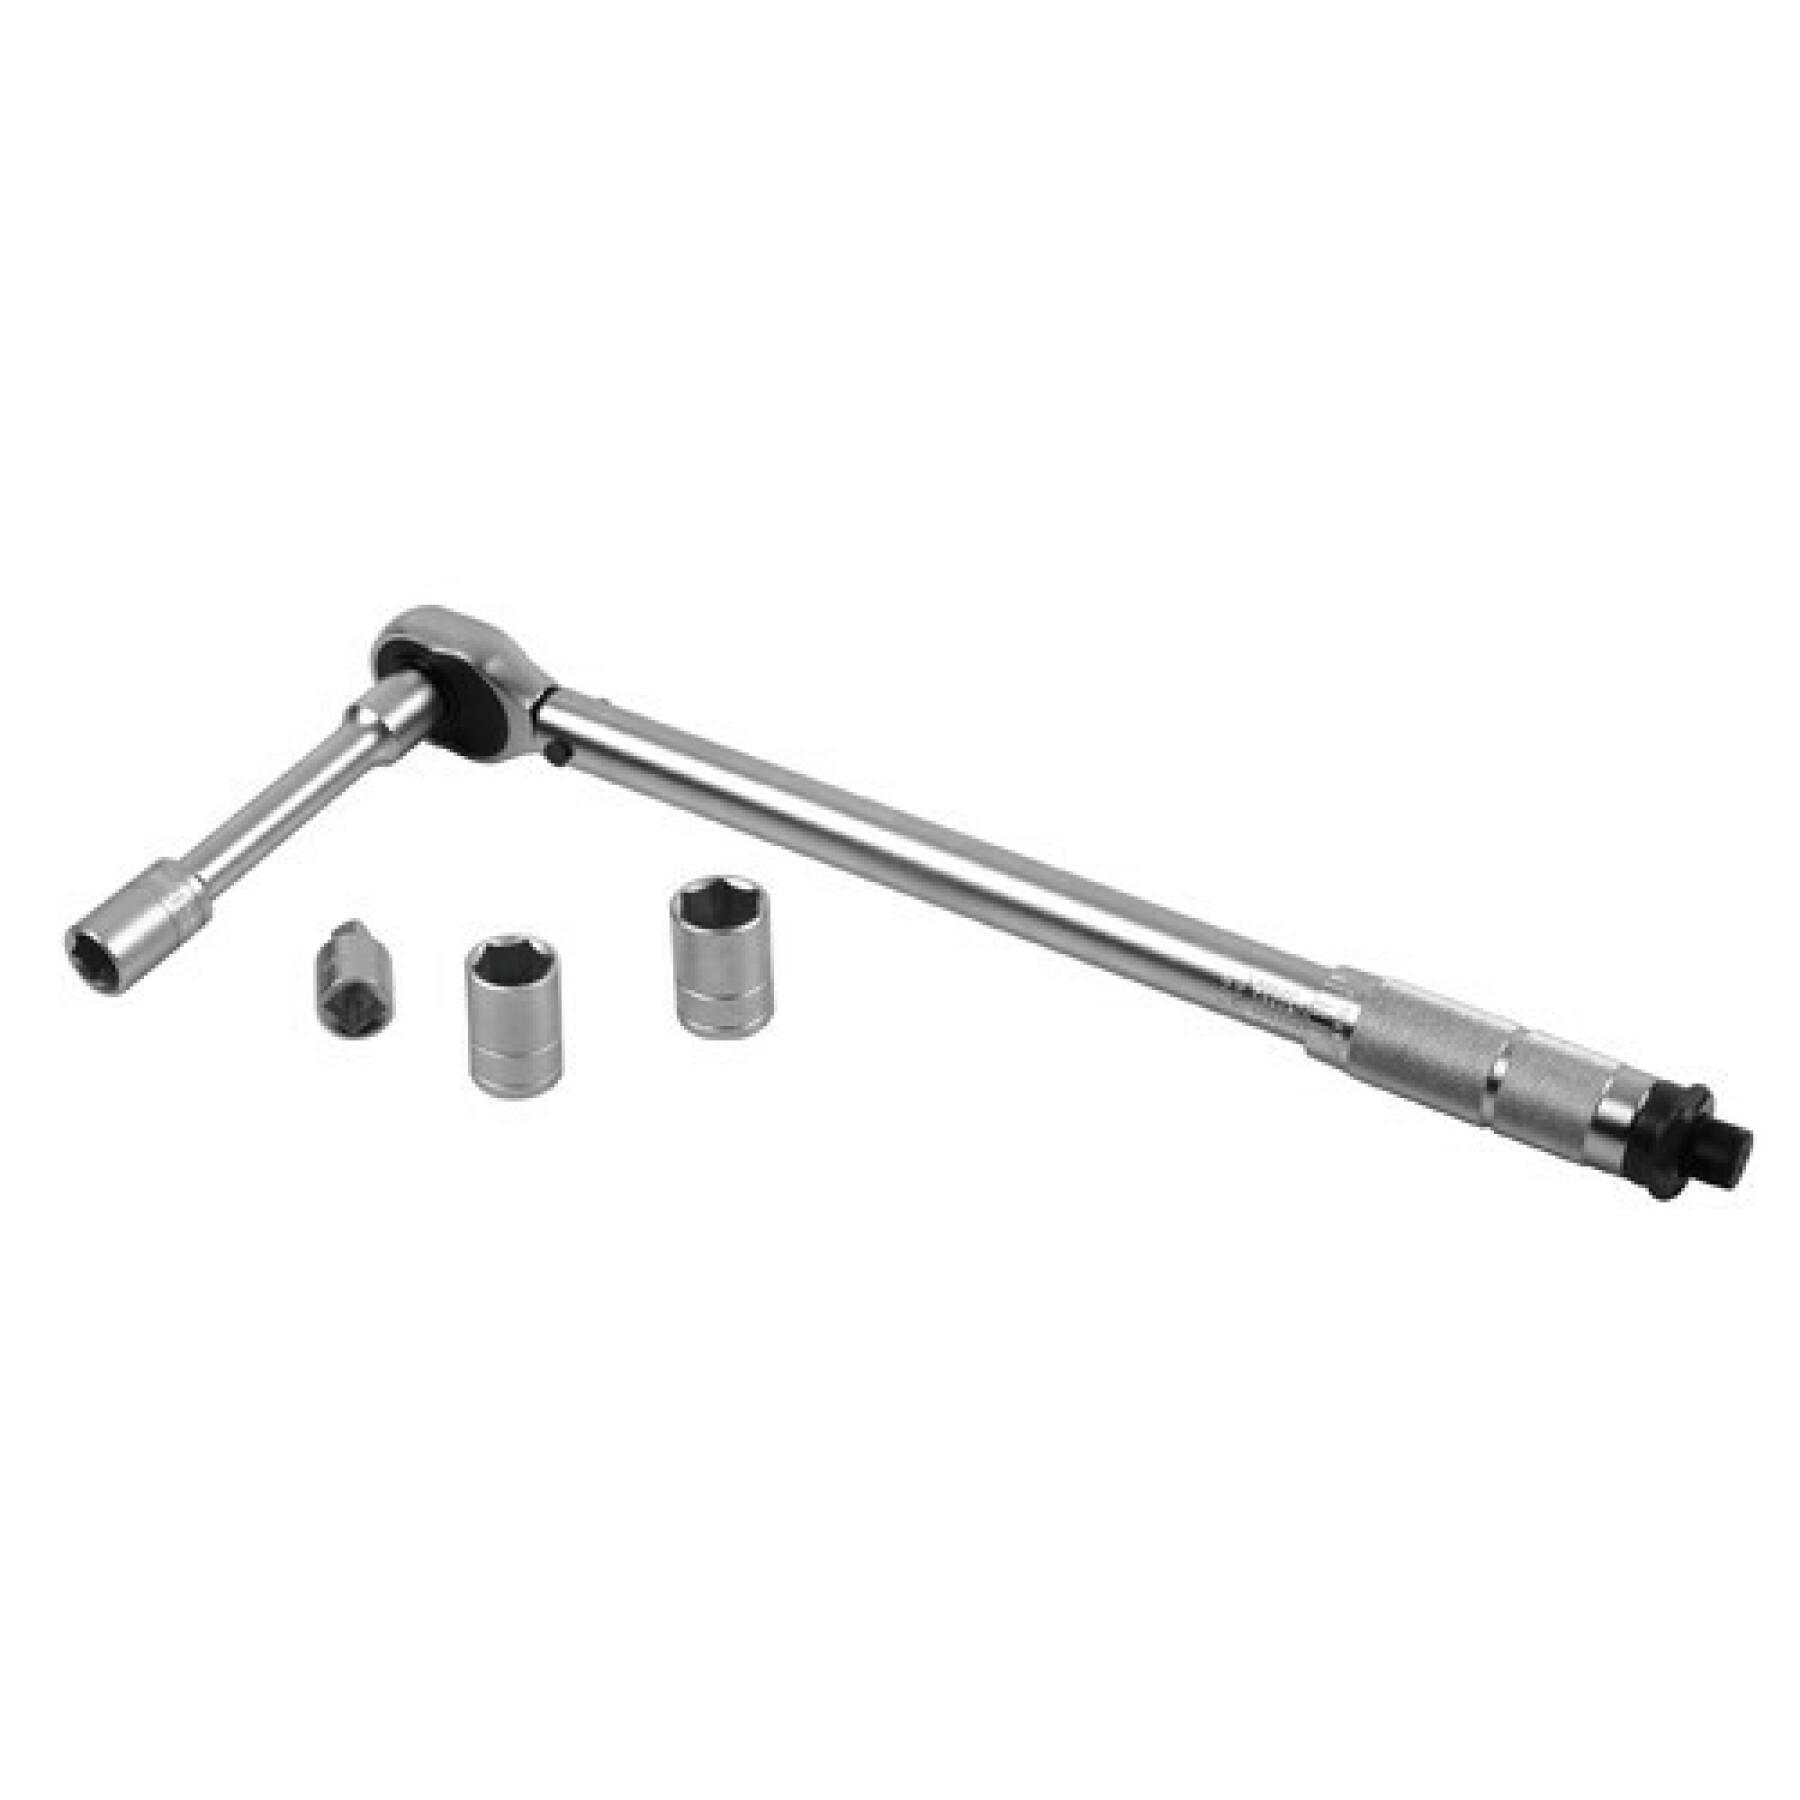 Torque wrench with release Lampa